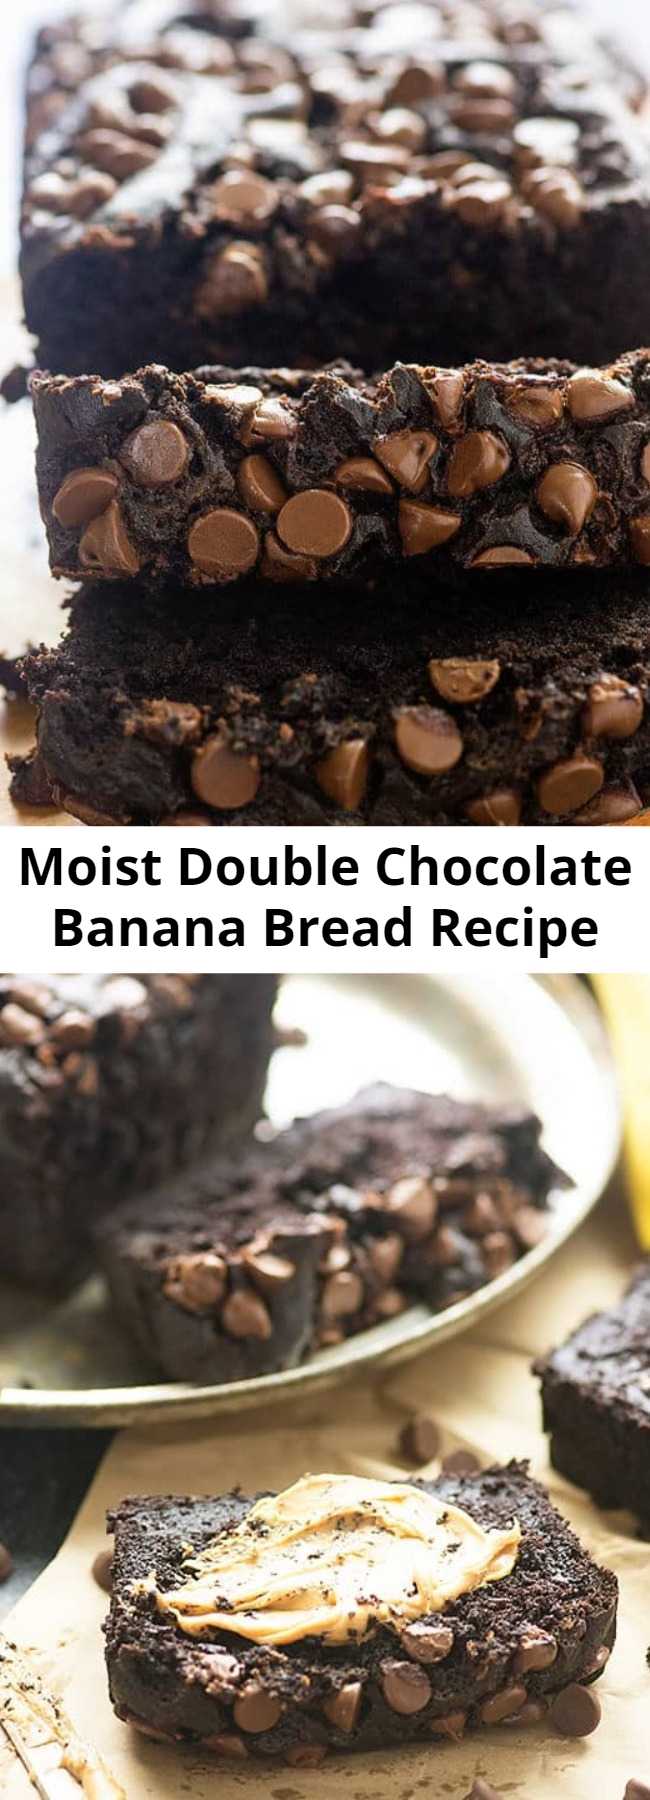 Double Chocolate Banana Bread Recipe - This chocolate banana bread recipe is seriously packing the chocolate flavor! It’s super moist and those chocolate chips all over the top just make it fun to eat! #banana #chocolate #recipe